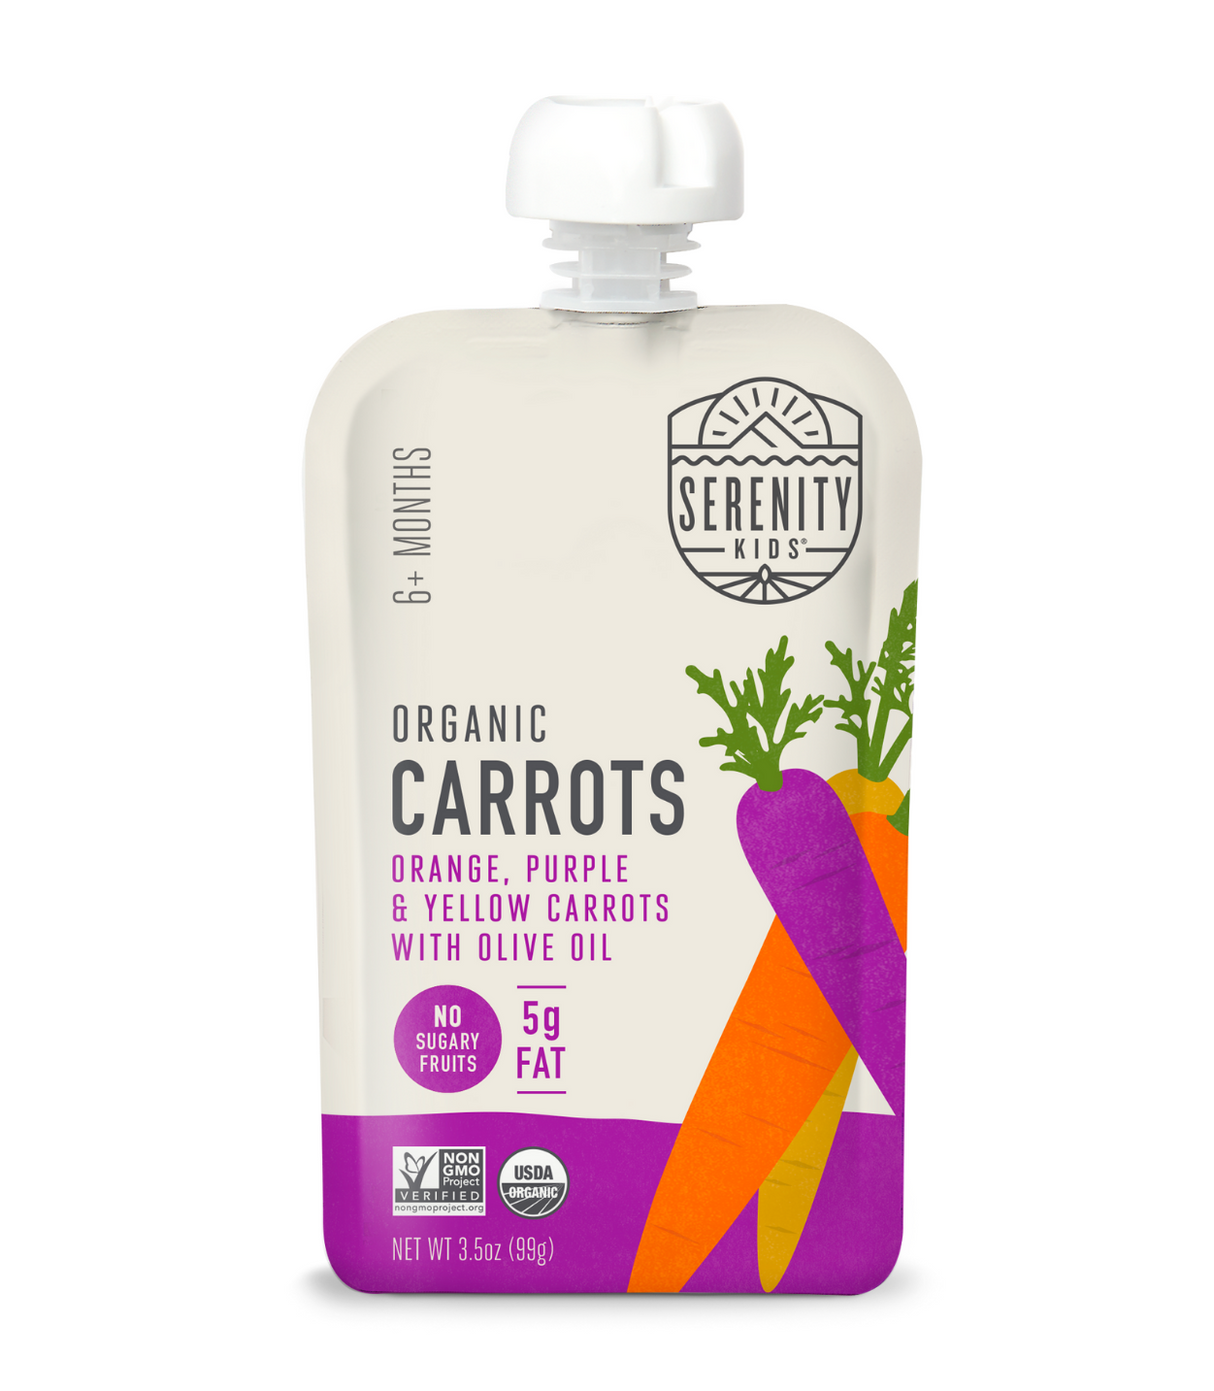 Serenity Kids Carrot Medley Pouch (Pack of 6 - 3.5 Oz) - Cozy Farm 